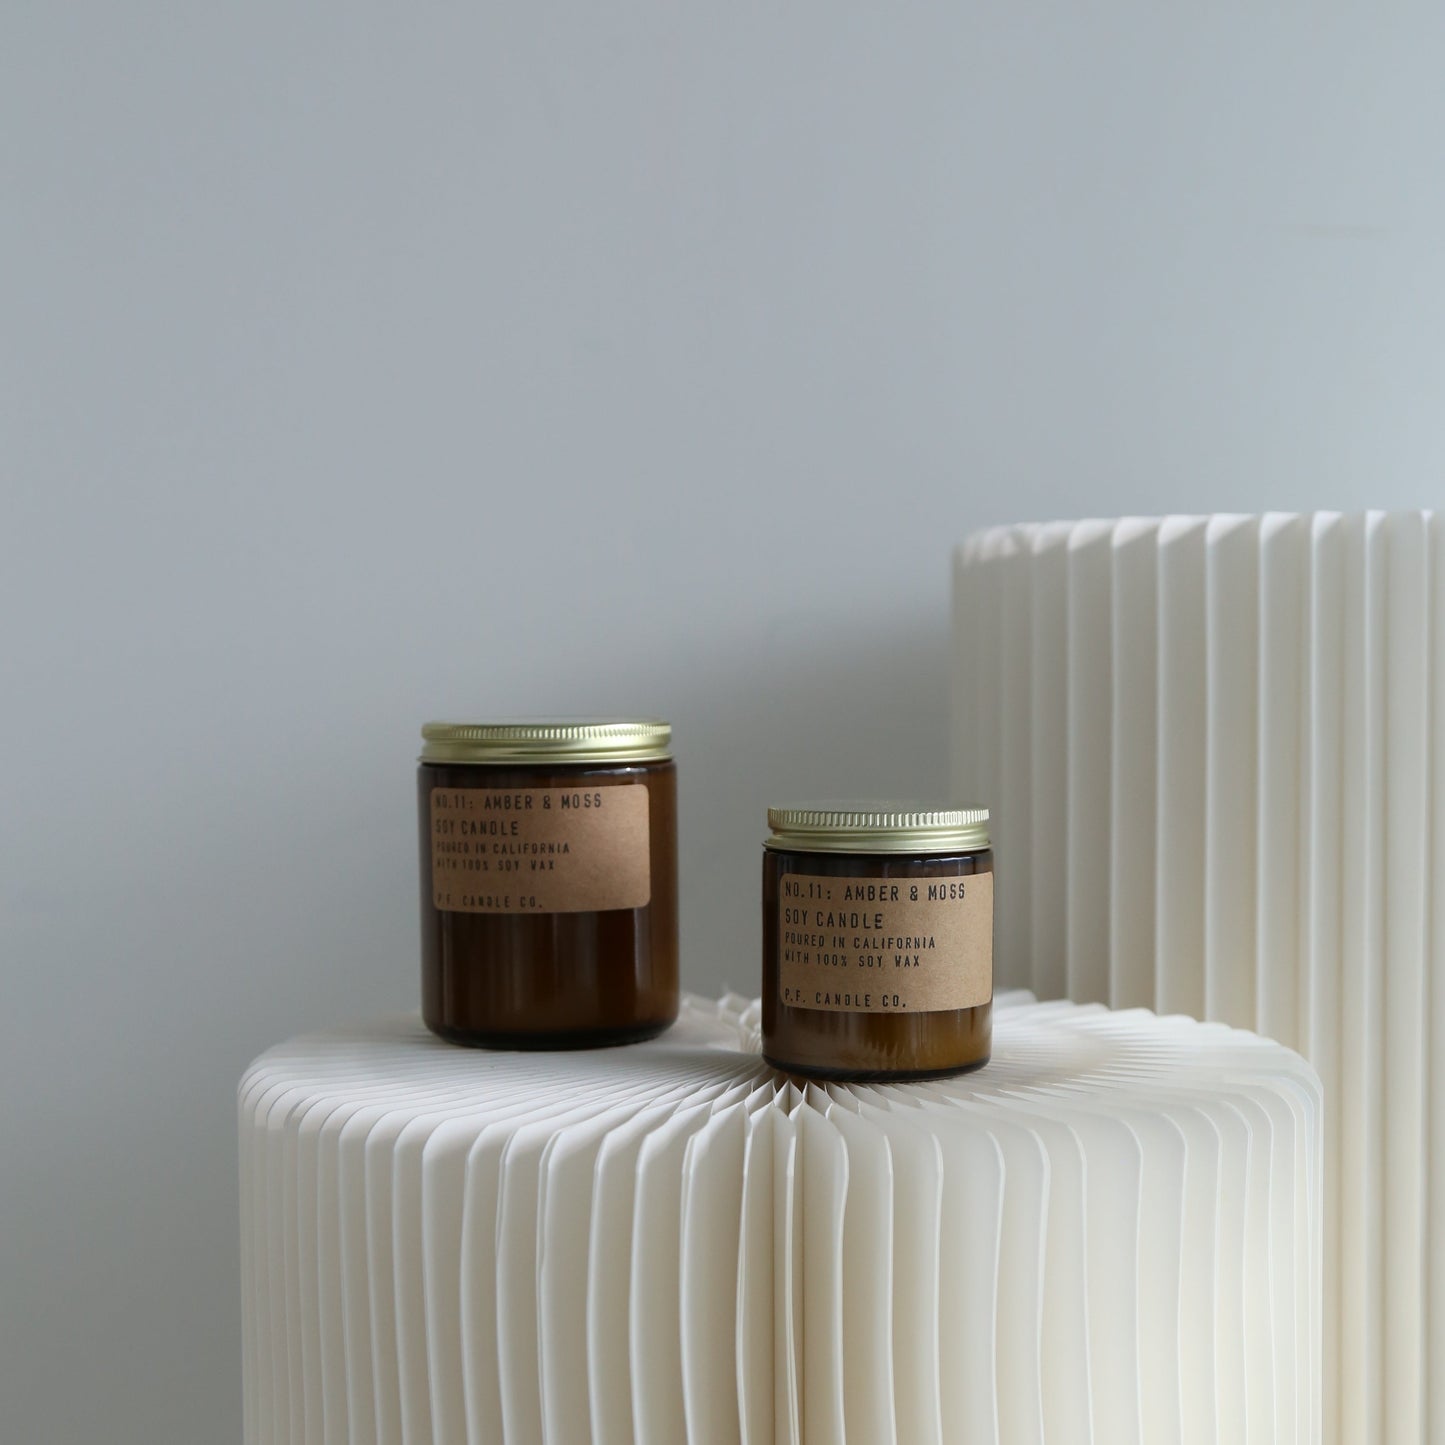 P.F. Candle Co. Amber + Moss Candle